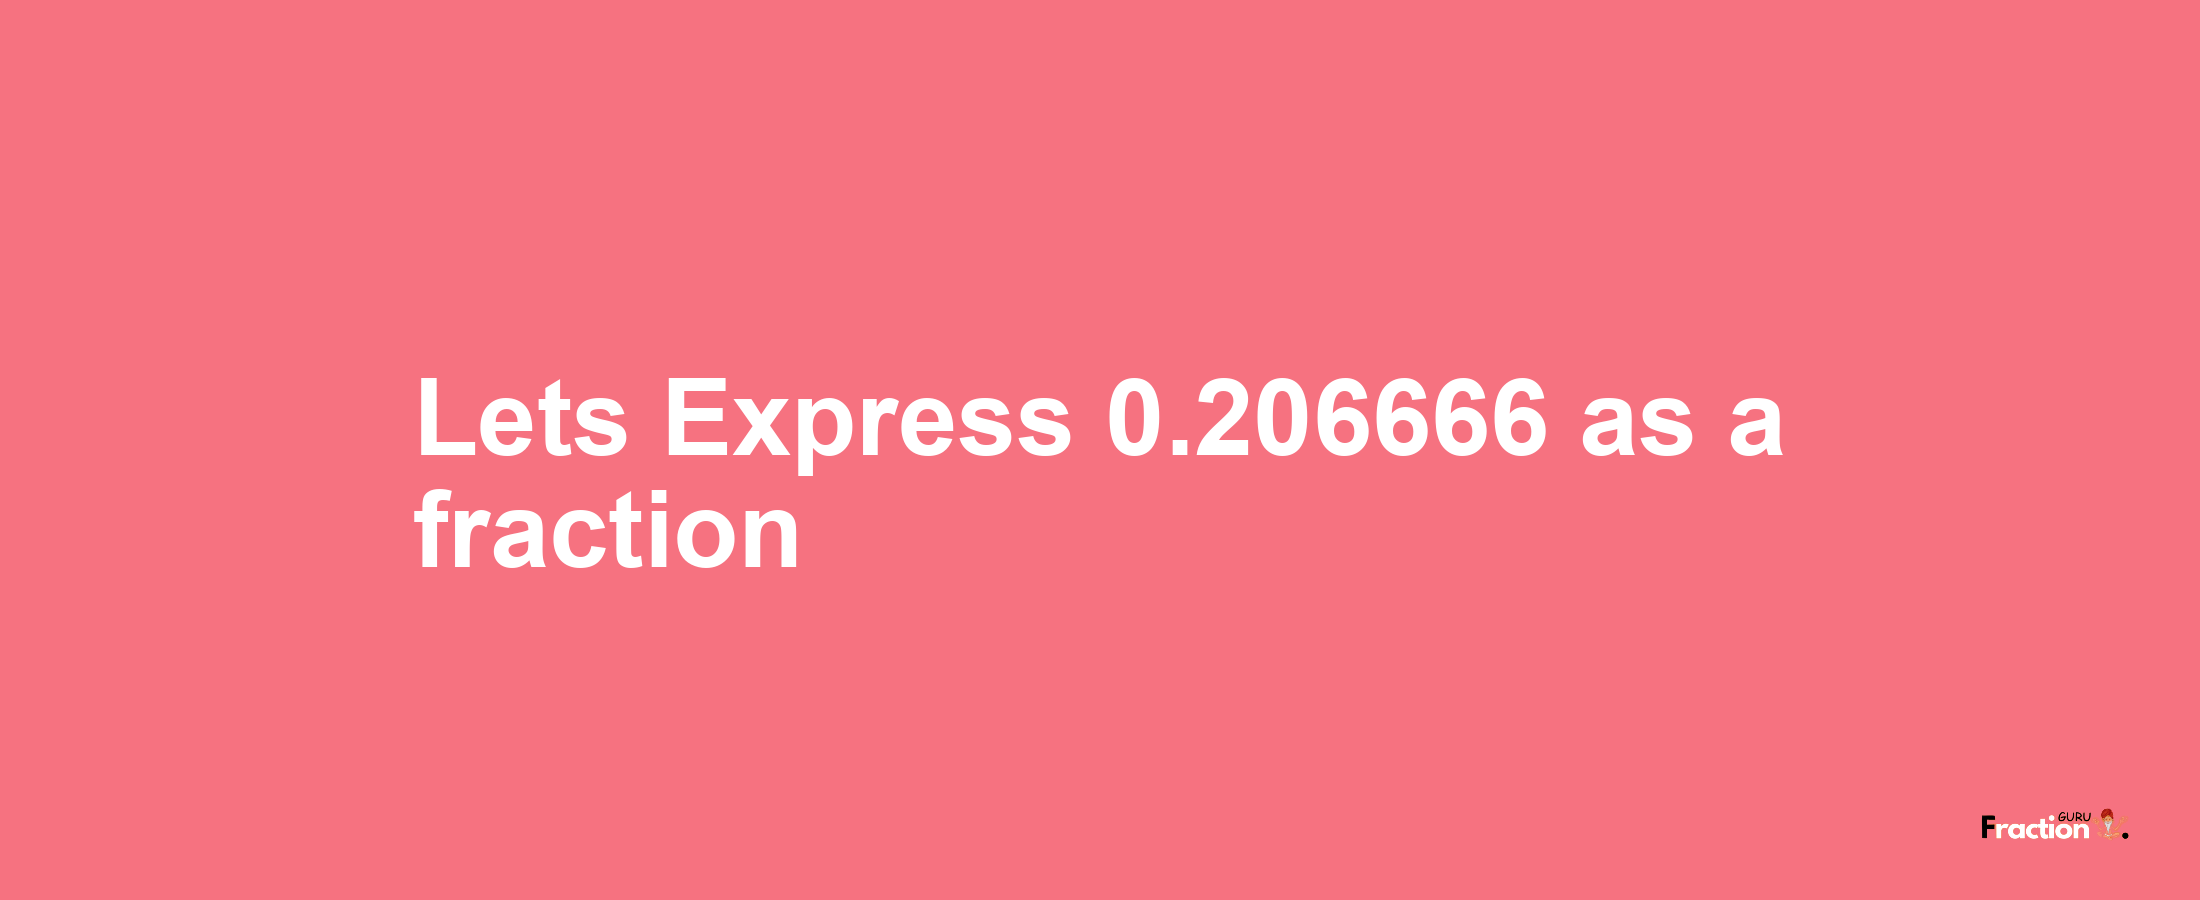 Lets Express 0.206666 as afraction